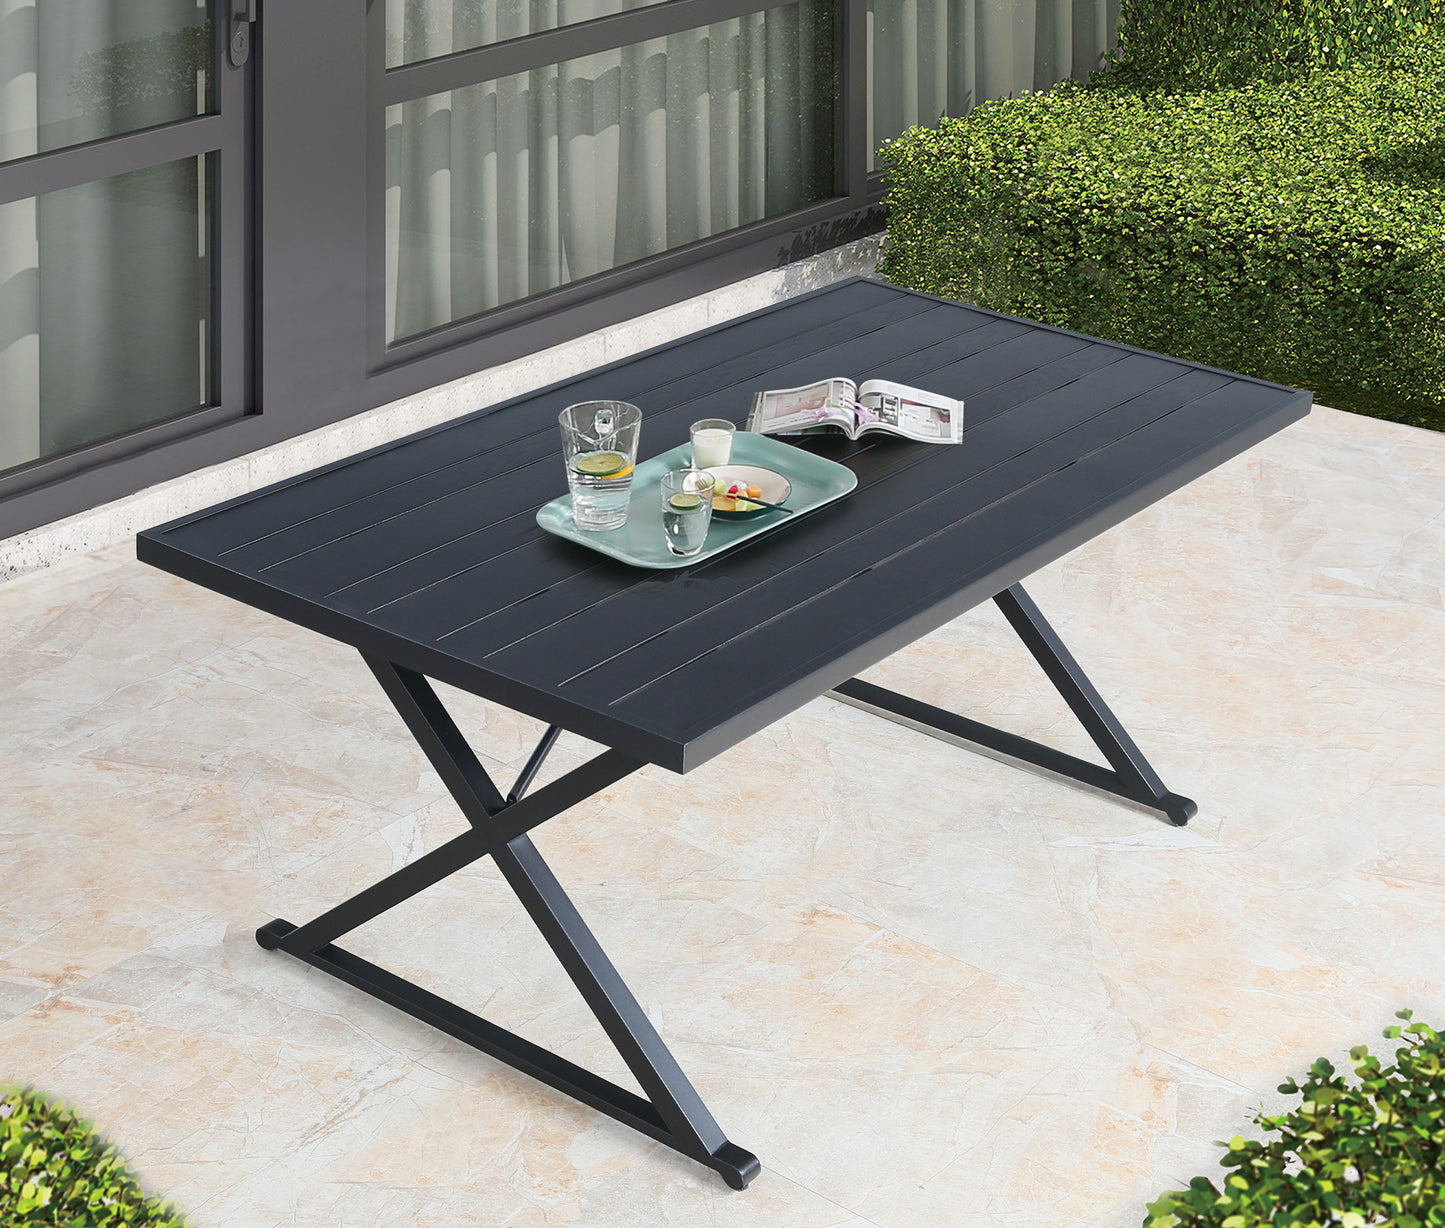 Rectangular 55"L Patio Metal Dining Table with Steel Slatted Wooden Textured Tabletop, Cross Legs and 1.57” Umbrella Hole for 4 Person